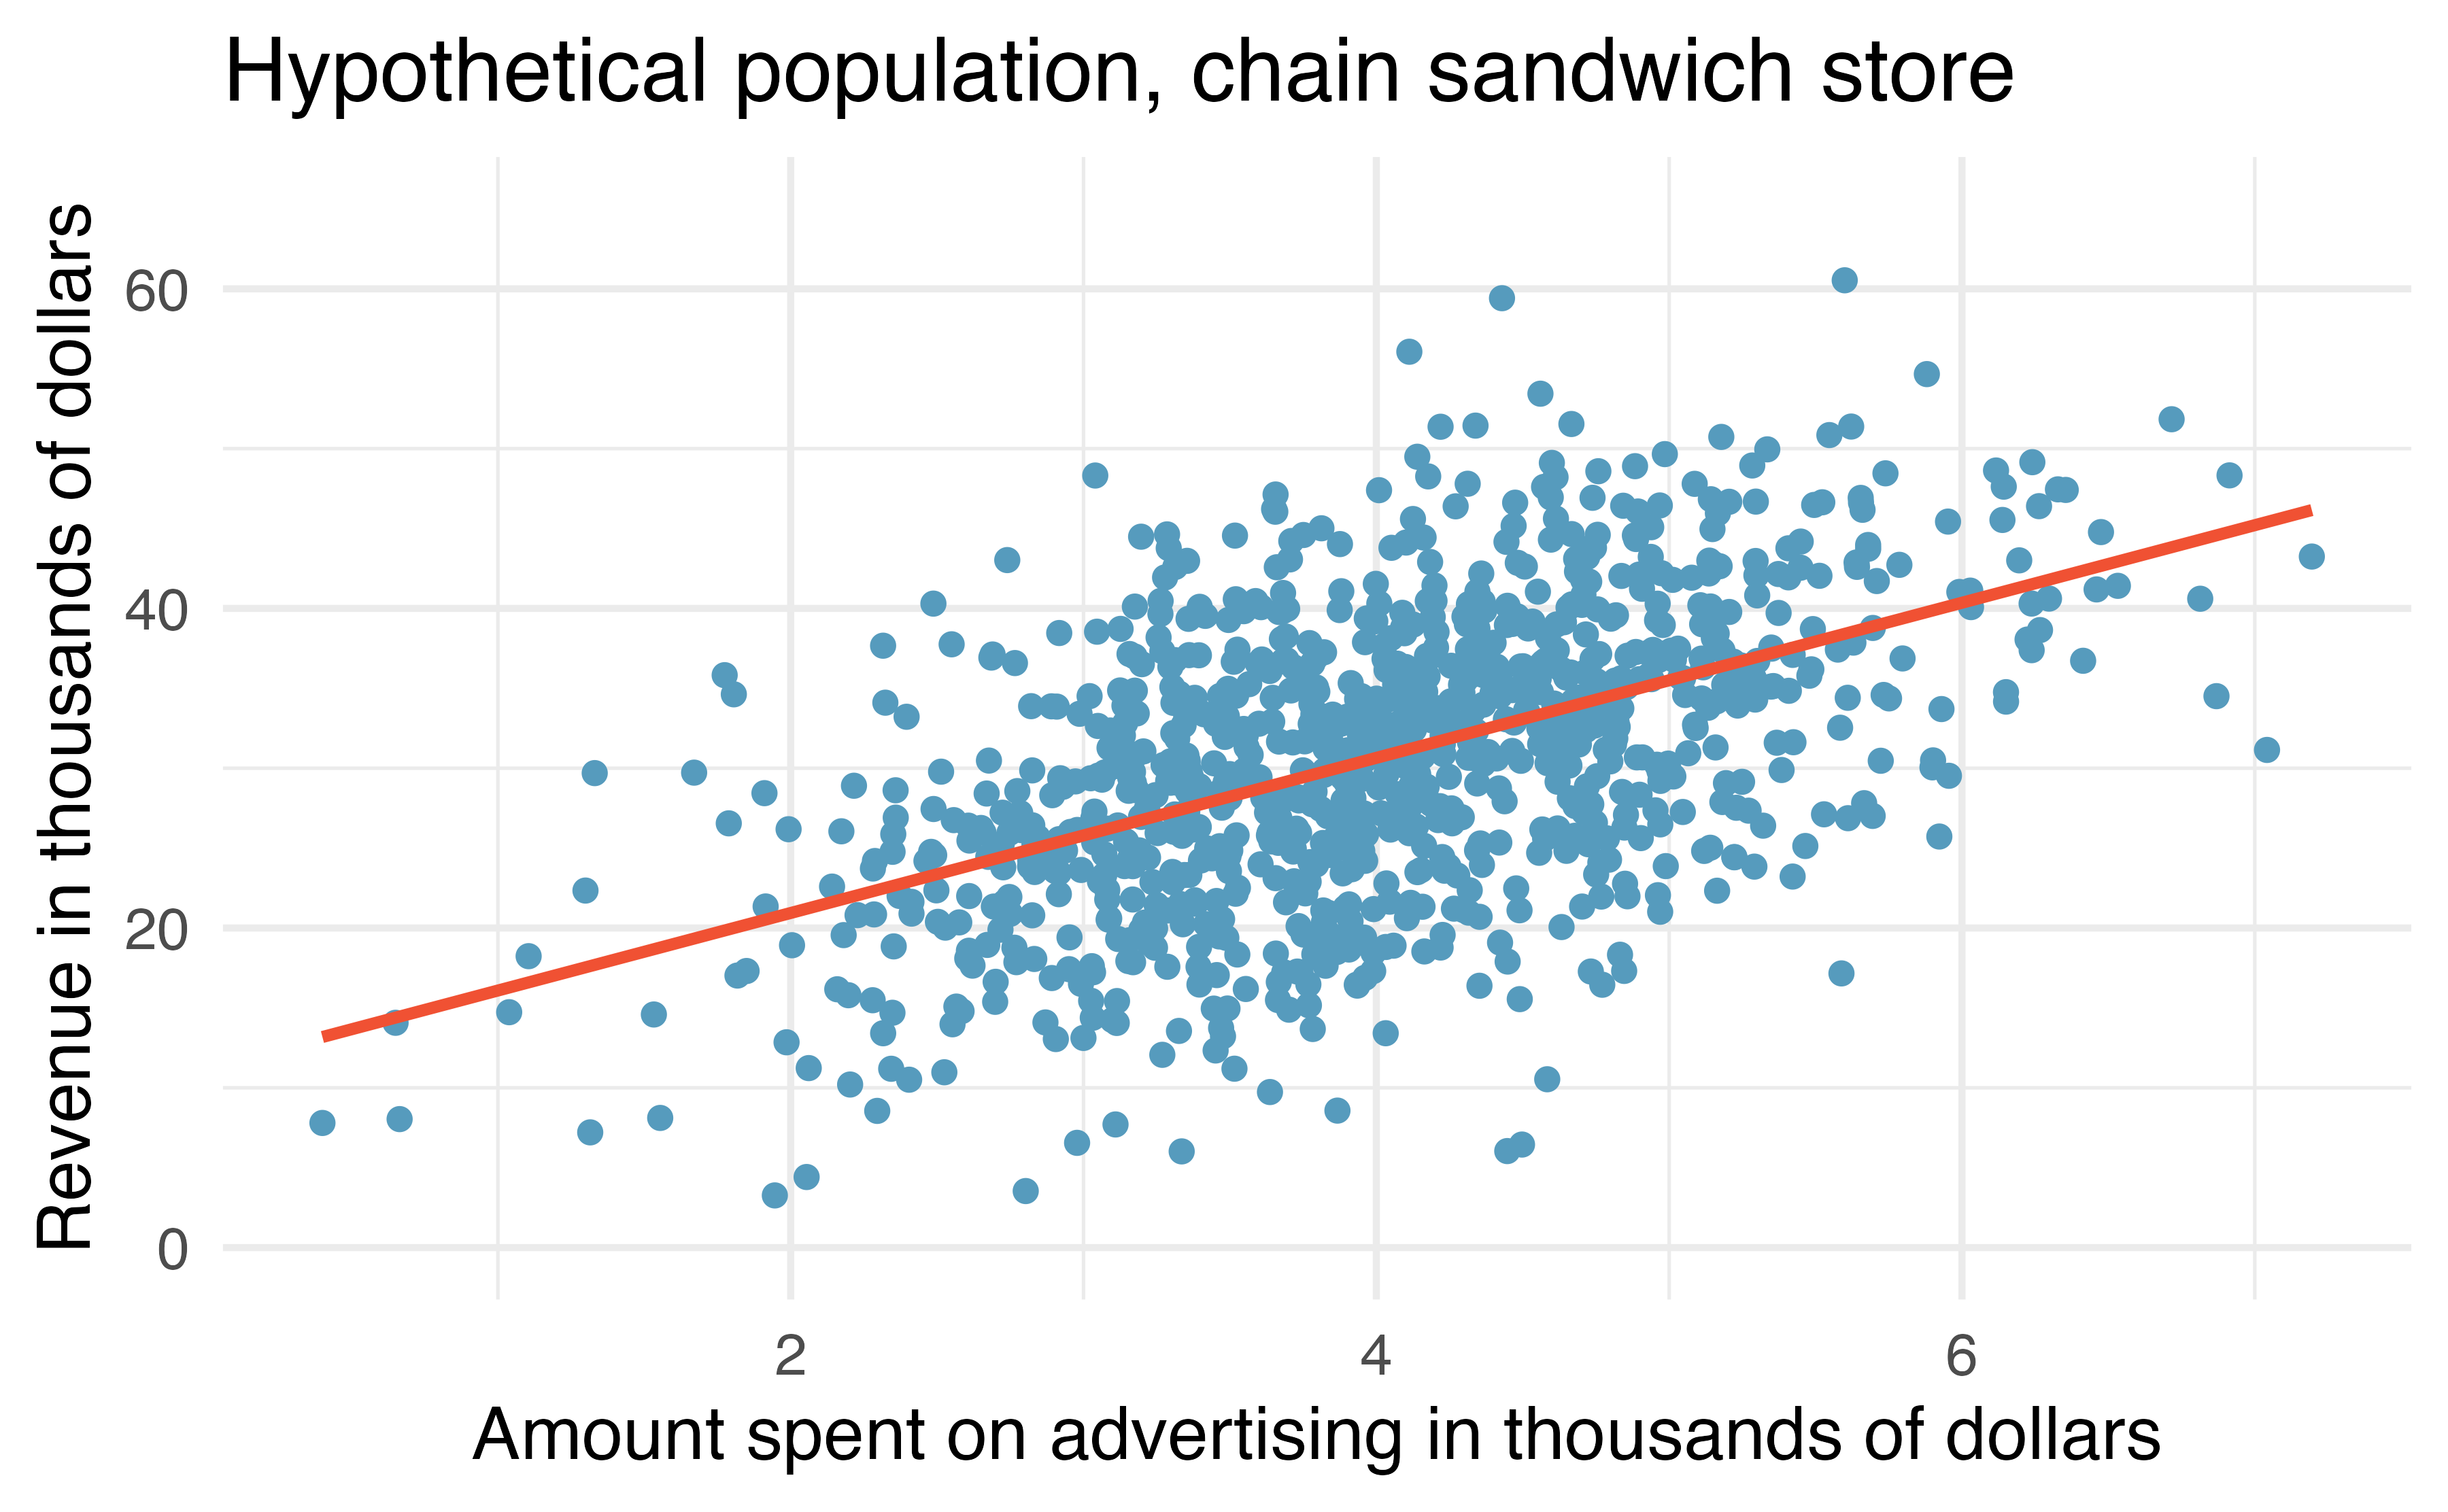 Revenue as a linear model of advertising dollars for a population of sandwich stores, in $1000.